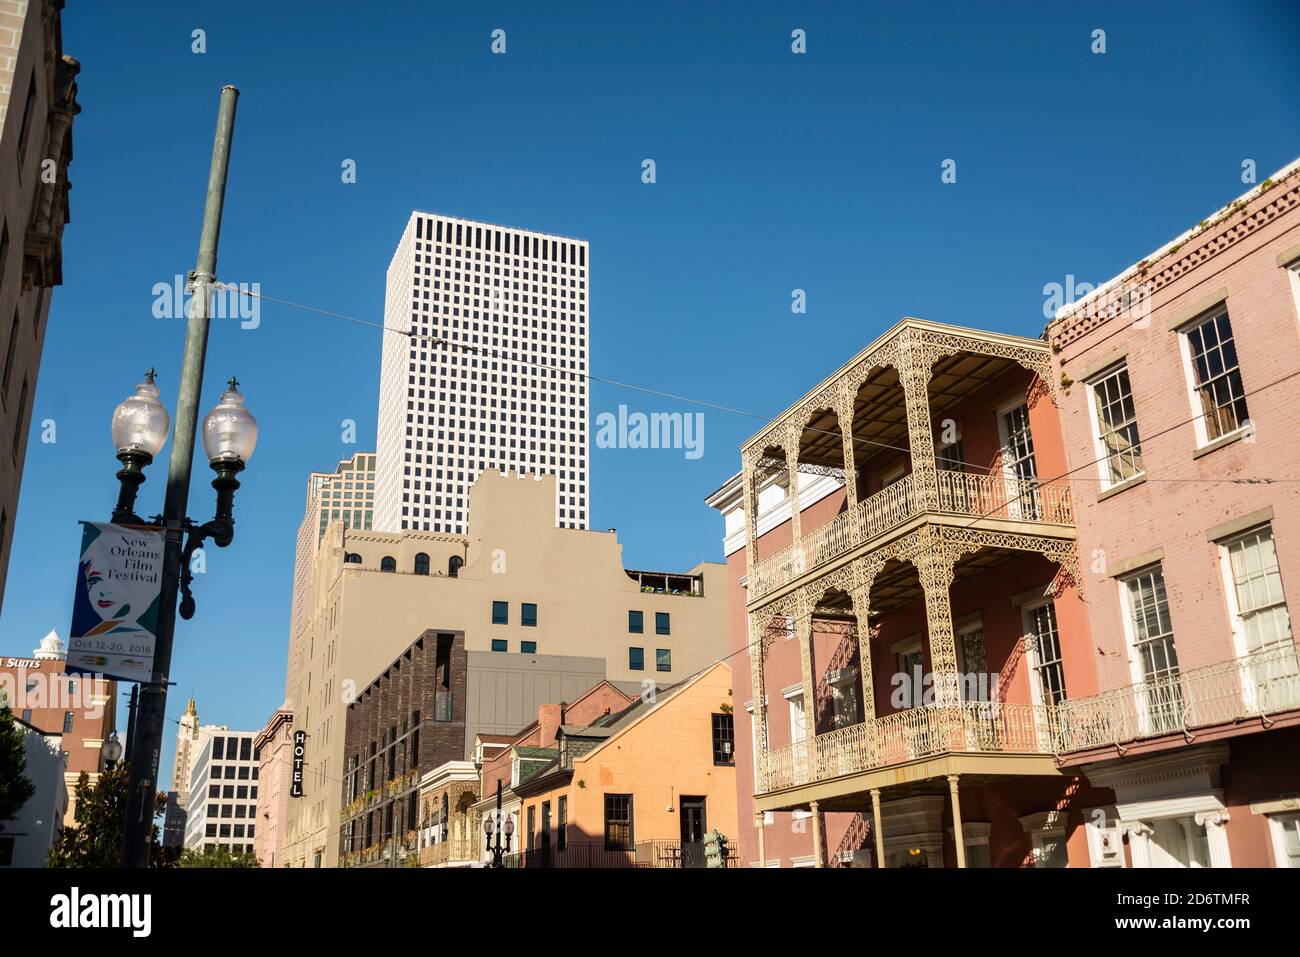 New Orleans residential district Stock Photo